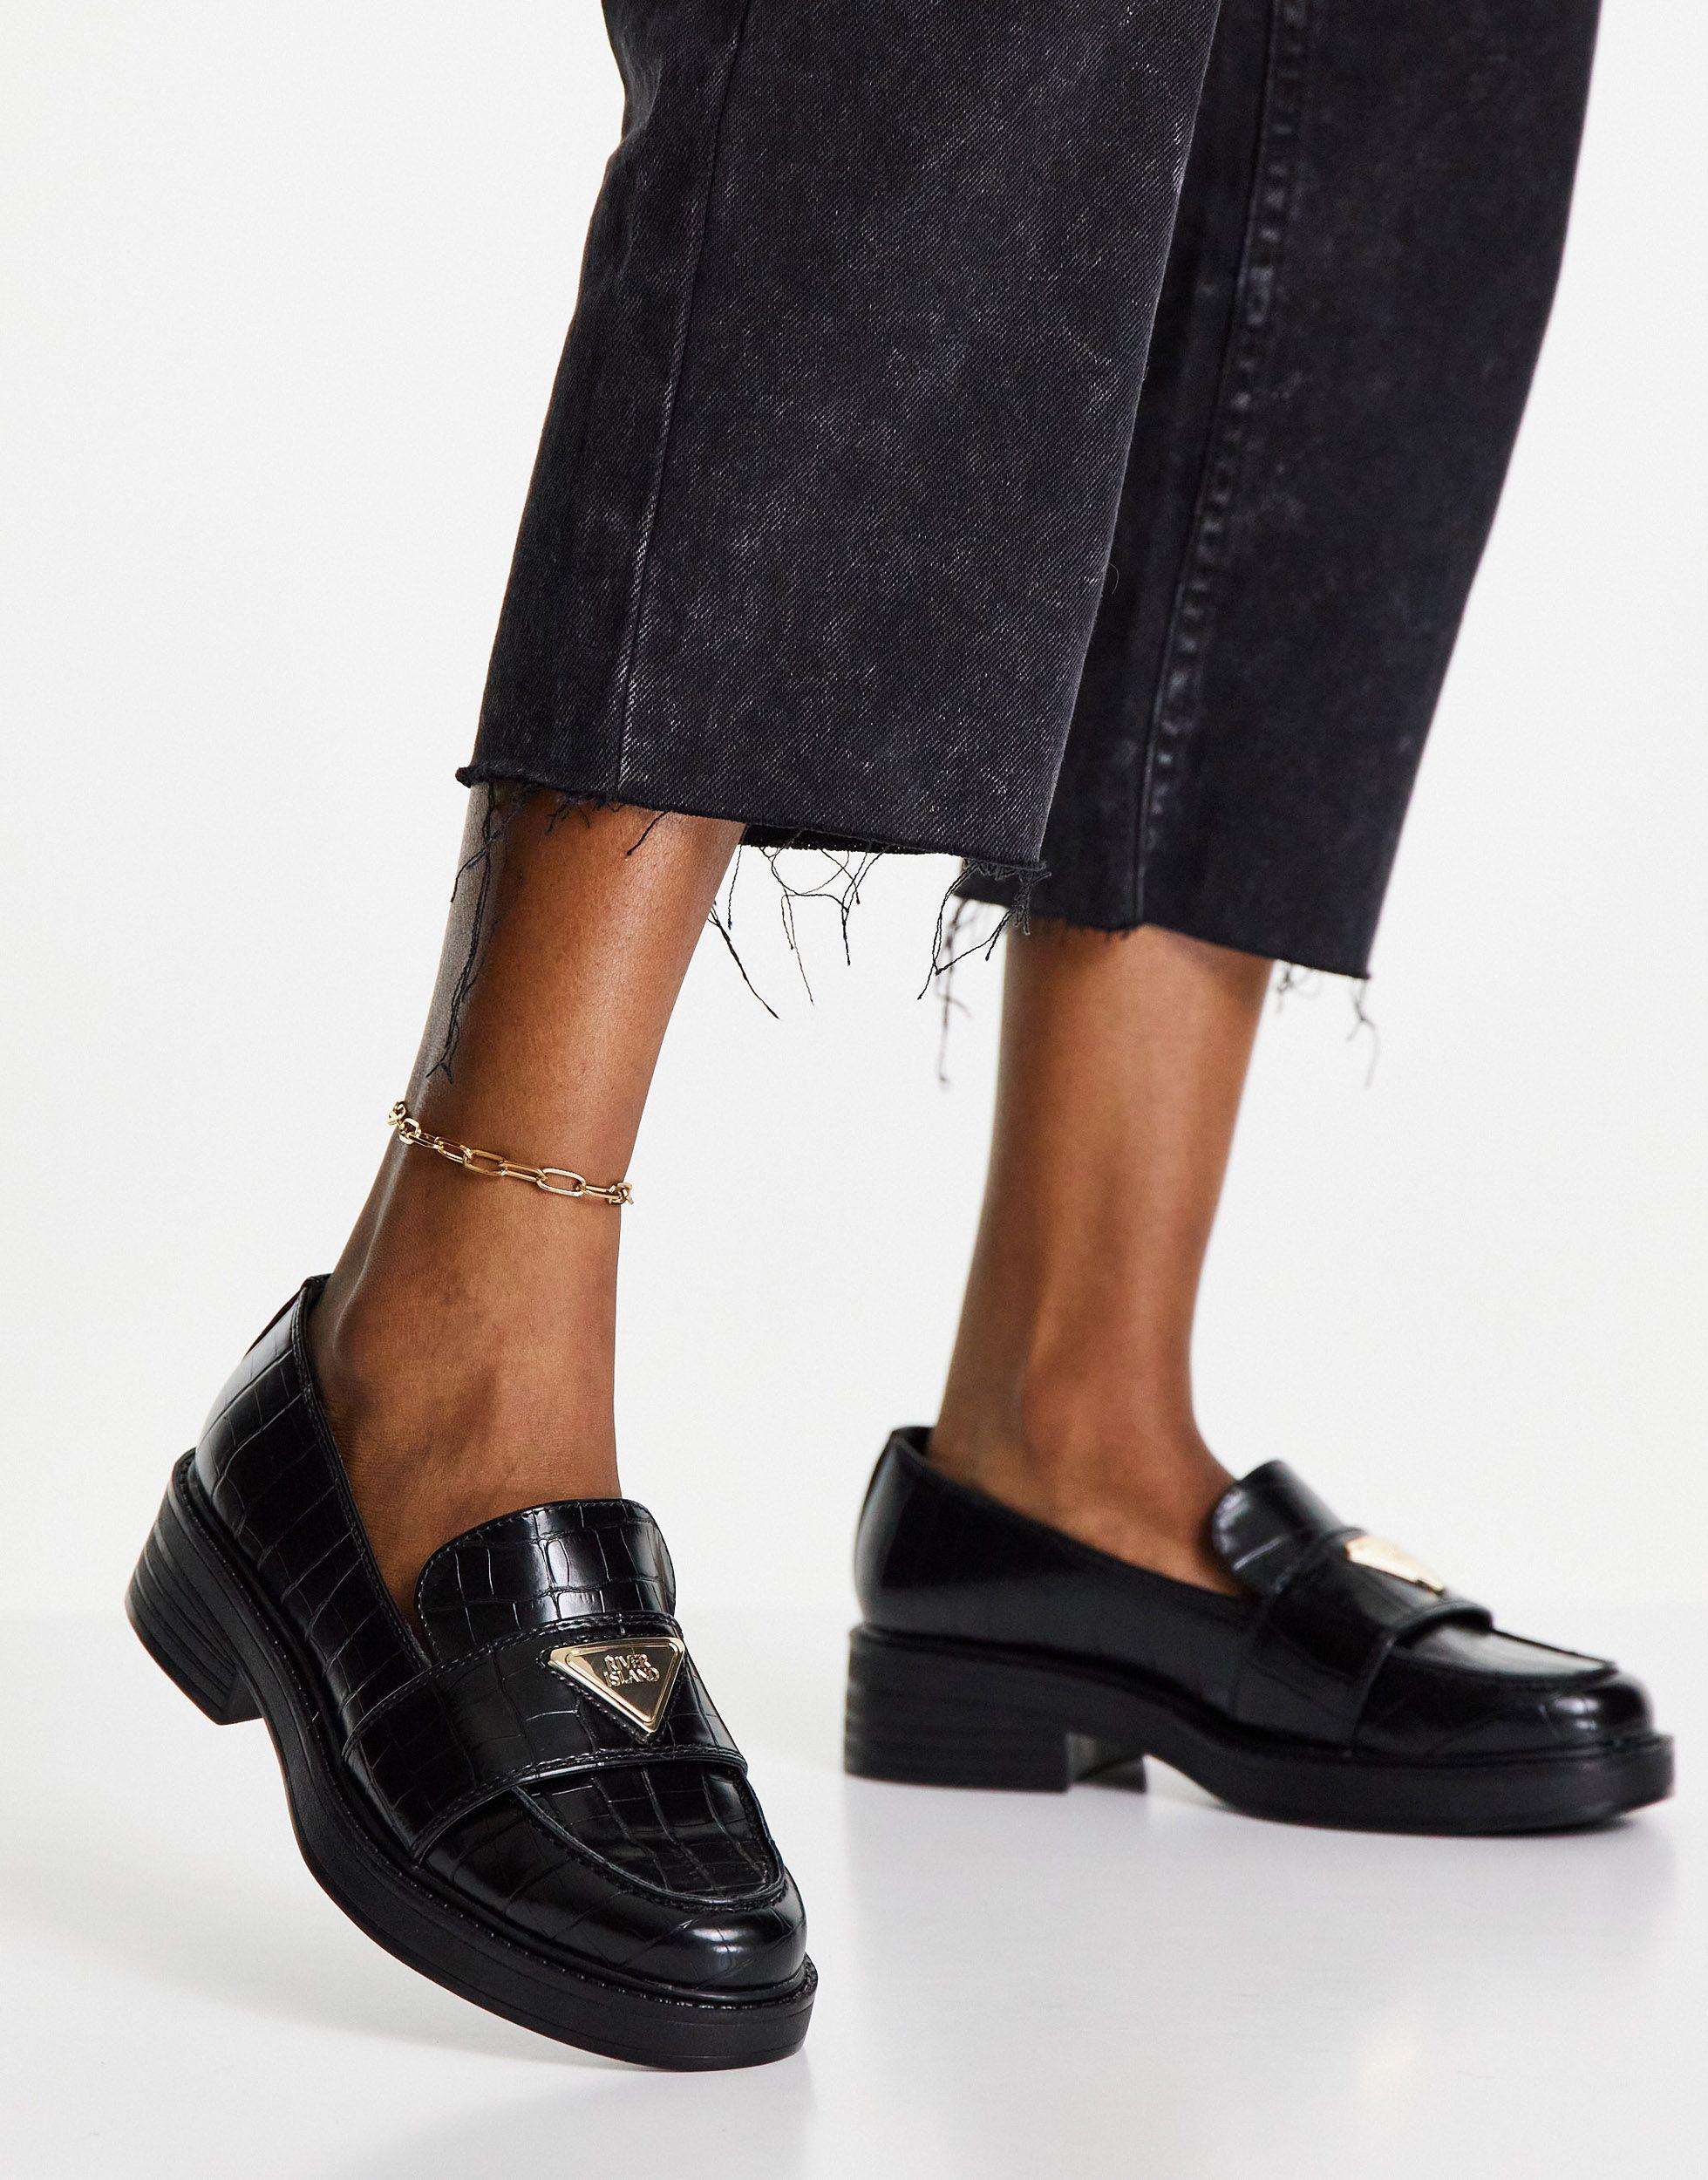 River Island Branded Chunky Croc Shoes in Black | Lyst